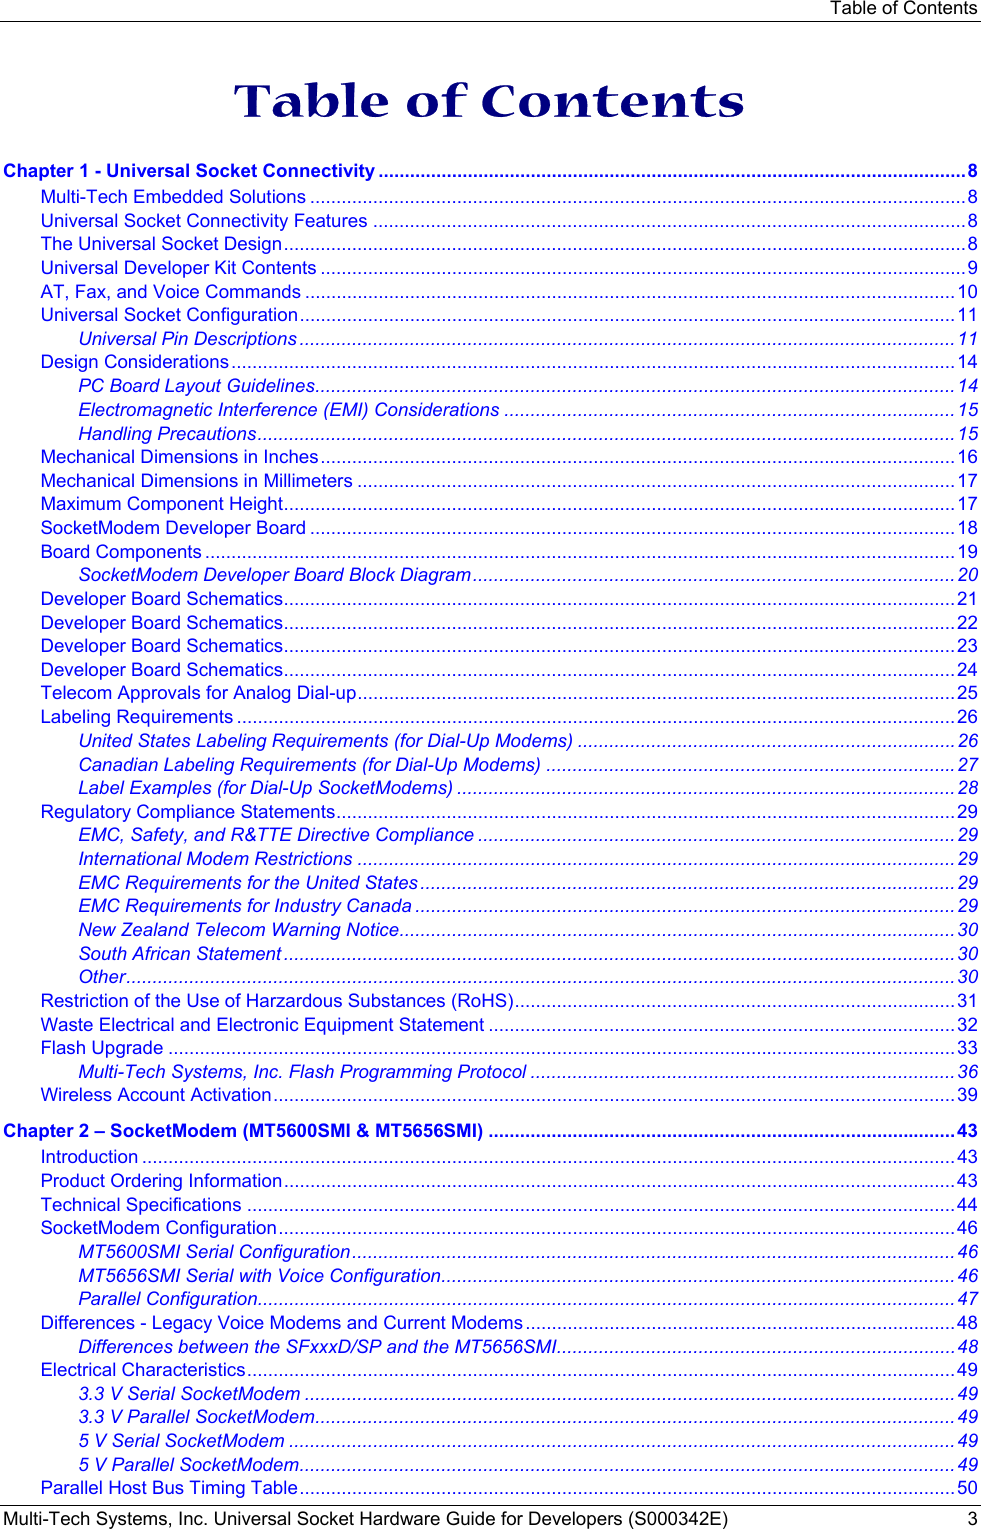 Table of Contents Multi-Tech Systems, Inc. Universal Socket Hardware Guide for Developers (S000342E)  3   Table of Contents Chapter 1 - Universal Socket Connectivity ................................................................................................................8 Multi-Tech Embedded Solutions .............................................................................................................................8 Universal Socket Connectivity Features .................................................................................................................8 The Universal Socket Design..................................................................................................................................8 Universal Developer Kit Contents ...........................................................................................................................9 AT, Fax, and Voice Commands ............................................................................................................................10 Universal Socket Configuration.............................................................................................................................11 Universal Pin Descriptions .............................................................................................................................11 Design Considerations..........................................................................................................................................14 PC Board Layout Guidelines..........................................................................................................................14 Electromagnetic Interference (EMI) Considerations ......................................................................................15 Handling Precautions.....................................................................................................................................15 Mechanical Dimensions in Inches.........................................................................................................................16 Mechanical Dimensions in Millimeters ..................................................................................................................17 Maximum Component Height................................................................................................................................17 SocketModem Developer Board ...........................................................................................................................18 Board Components ...............................................................................................................................................19 SocketModem Developer Board Block Diagram............................................................................................20 Developer Board Schematics................................................................................................................................21 Developer Board Schematics................................................................................................................................22 Developer Board Schematics................................................................................................................................23 Developer Board Schematics................................................................................................................................24 Telecom Approvals for Analog Dial-up..................................................................................................................25 Labeling Requirements .........................................................................................................................................26 United States Labeling Requirements (for Dial-Up Modems) ........................................................................26 Canadian Labeling Requirements (for Dial-Up Modems) ..............................................................................27 Label Examples (for Dial-Up SocketModems) ...............................................................................................28 Regulatory Compliance Statements......................................................................................................................29 EMC, Safety, and R&amp;TTE Directive Compliance ...........................................................................................29 International Modem Restrictions ..................................................................................................................29 EMC Requirements for the United States......................................................................................................29 EMC Requirements for Industry Canada .......................................................................................................29 New Zealand Telecom Warning Notice..........................................................................................................30 South African Statement ................................................................................................................................30 Other..............................................................................................................................................................30 Restriction of the Use of Harzardous Substances (RoHS)....................................................................................31 Waste Electrical and Electronic Equipment Statement .........................................................................................32 Flash Upgrade ......................................................................................................................................................33 Multi-Tech Systems, Inc. Flash Programming Protocol .................................................................................36 Wireless Account Activation..................................................................................................................................39 Chapter 2 – SocketModem (MT5600SMI &amp; MT5656SMI) .........................................................................................43 Introduction ...........................................................................................................................................................43 Product Ordering Information................................................................................................................................43 Technical Specifications .......................................................................................................................................44 SocketModem Configuration.................................................................................................................................46 MT5600SMI Serial Configuration...................................................................................................................46 MT5656SMI Serial with Voice Configuration..................................................................................................46 Parallel Configuration.....................................................................................................................................47 Differences - Legacy Voice Modems and Current Modems ..................................................................................48 Differences between the SFxxxD/SP and the MT5656SMI............................................................................48 Electrical Characteristics.......................................................................................................................................49 3.3 V Serial SocketModem ............................................................................................................................49 3.3 V Parallel SocketModem..........................................................................................................................49 5 V Serial SocketModem ...............................................................................................................................49 5 V Parallel SocketModem.............................................................................................................................49 Parallel Host Bus Timing Table.............................................................................................................................50 